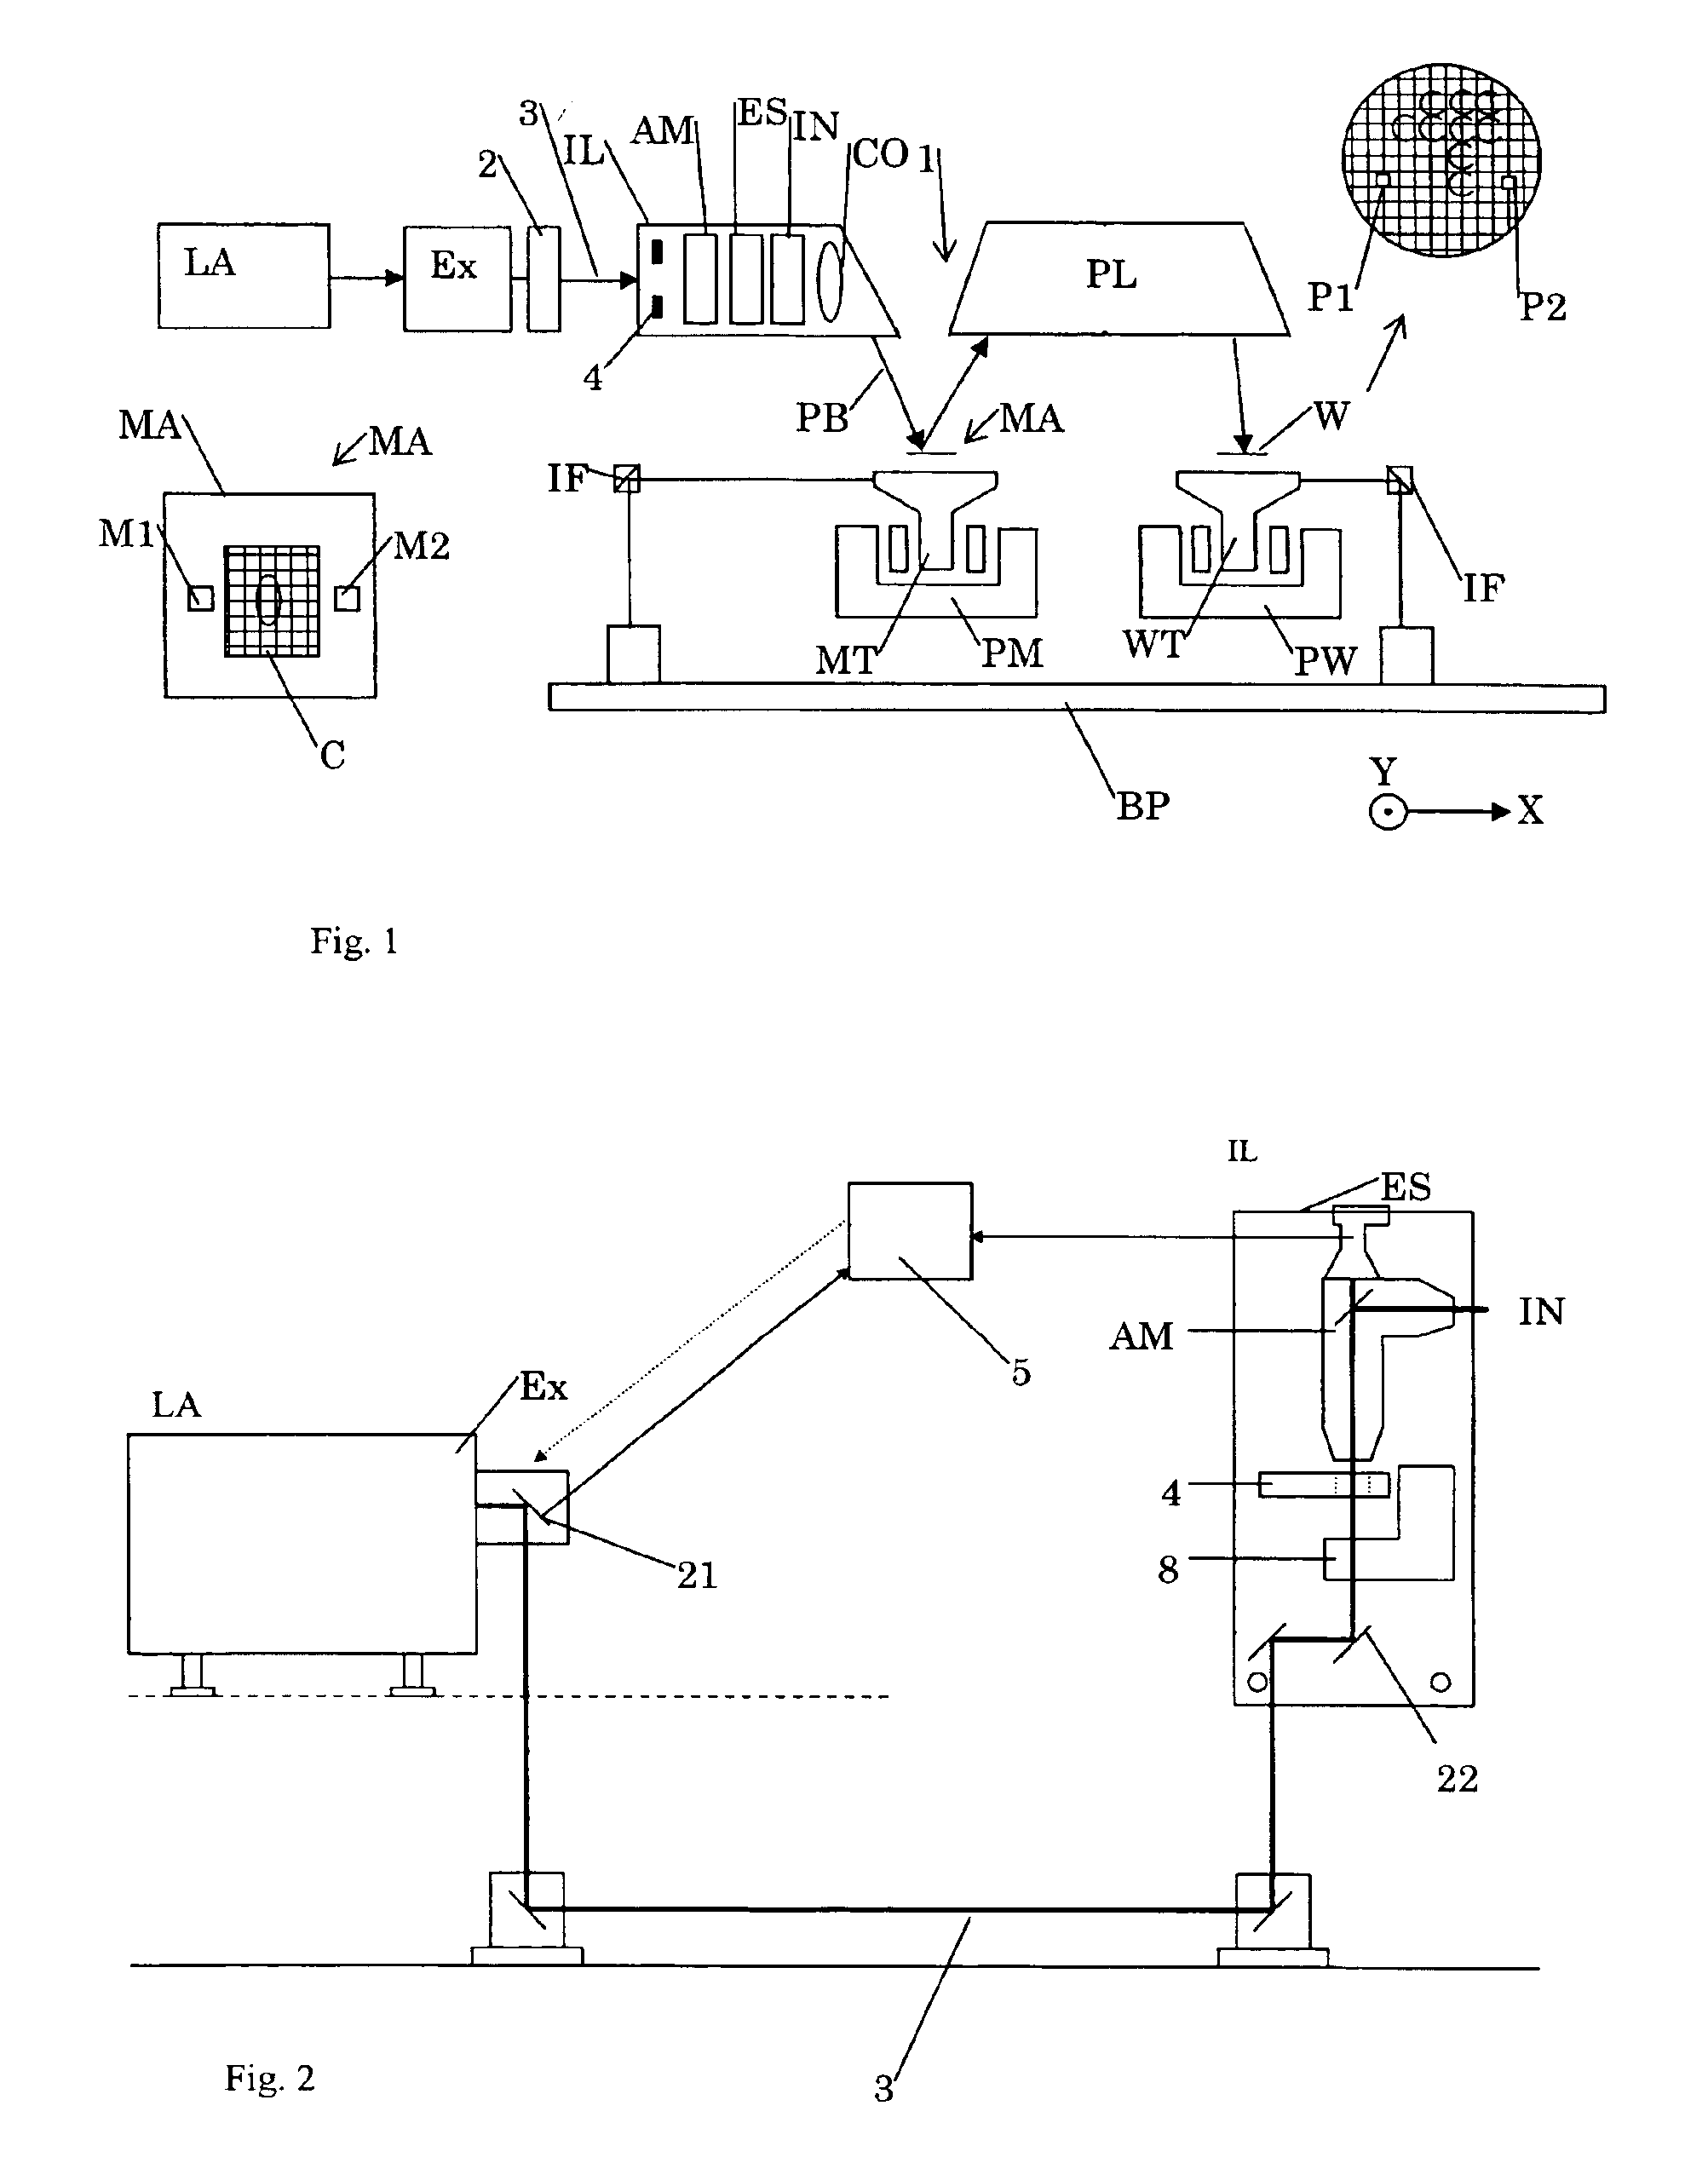 Lithographic apparatus and method to determine beam characteristics